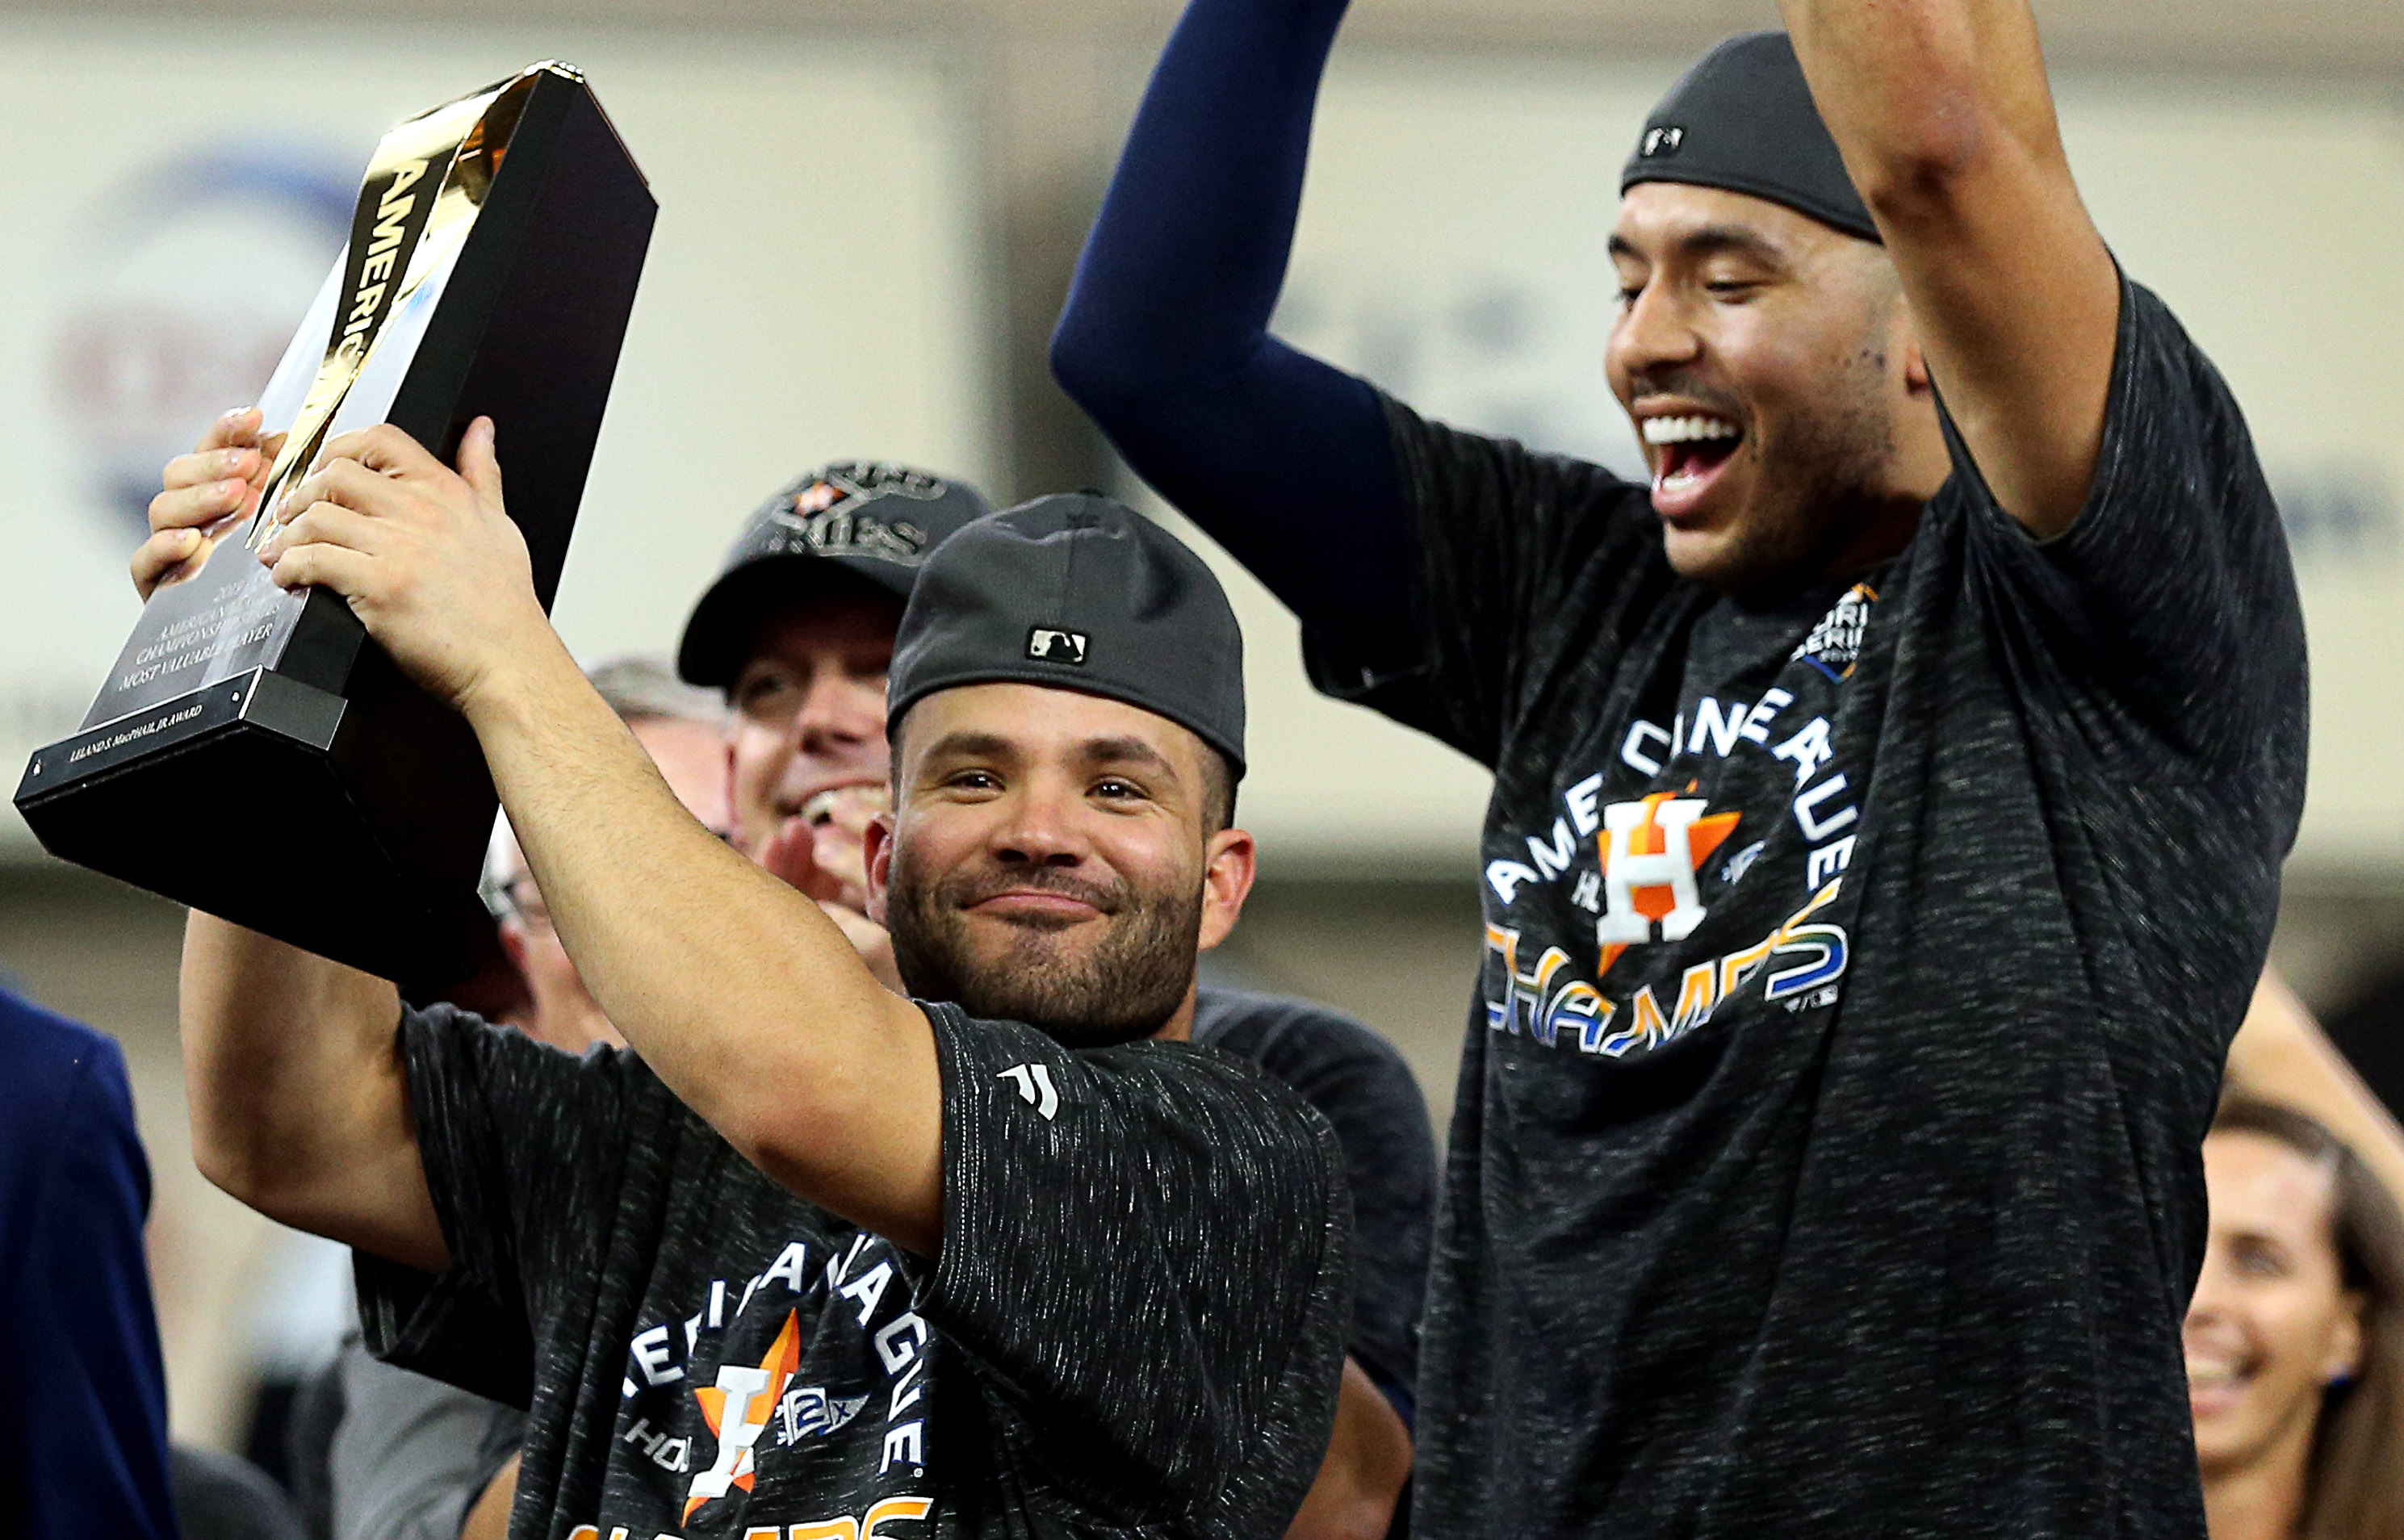 Here's what you need to know about the Astros' ring ceremony on March 27